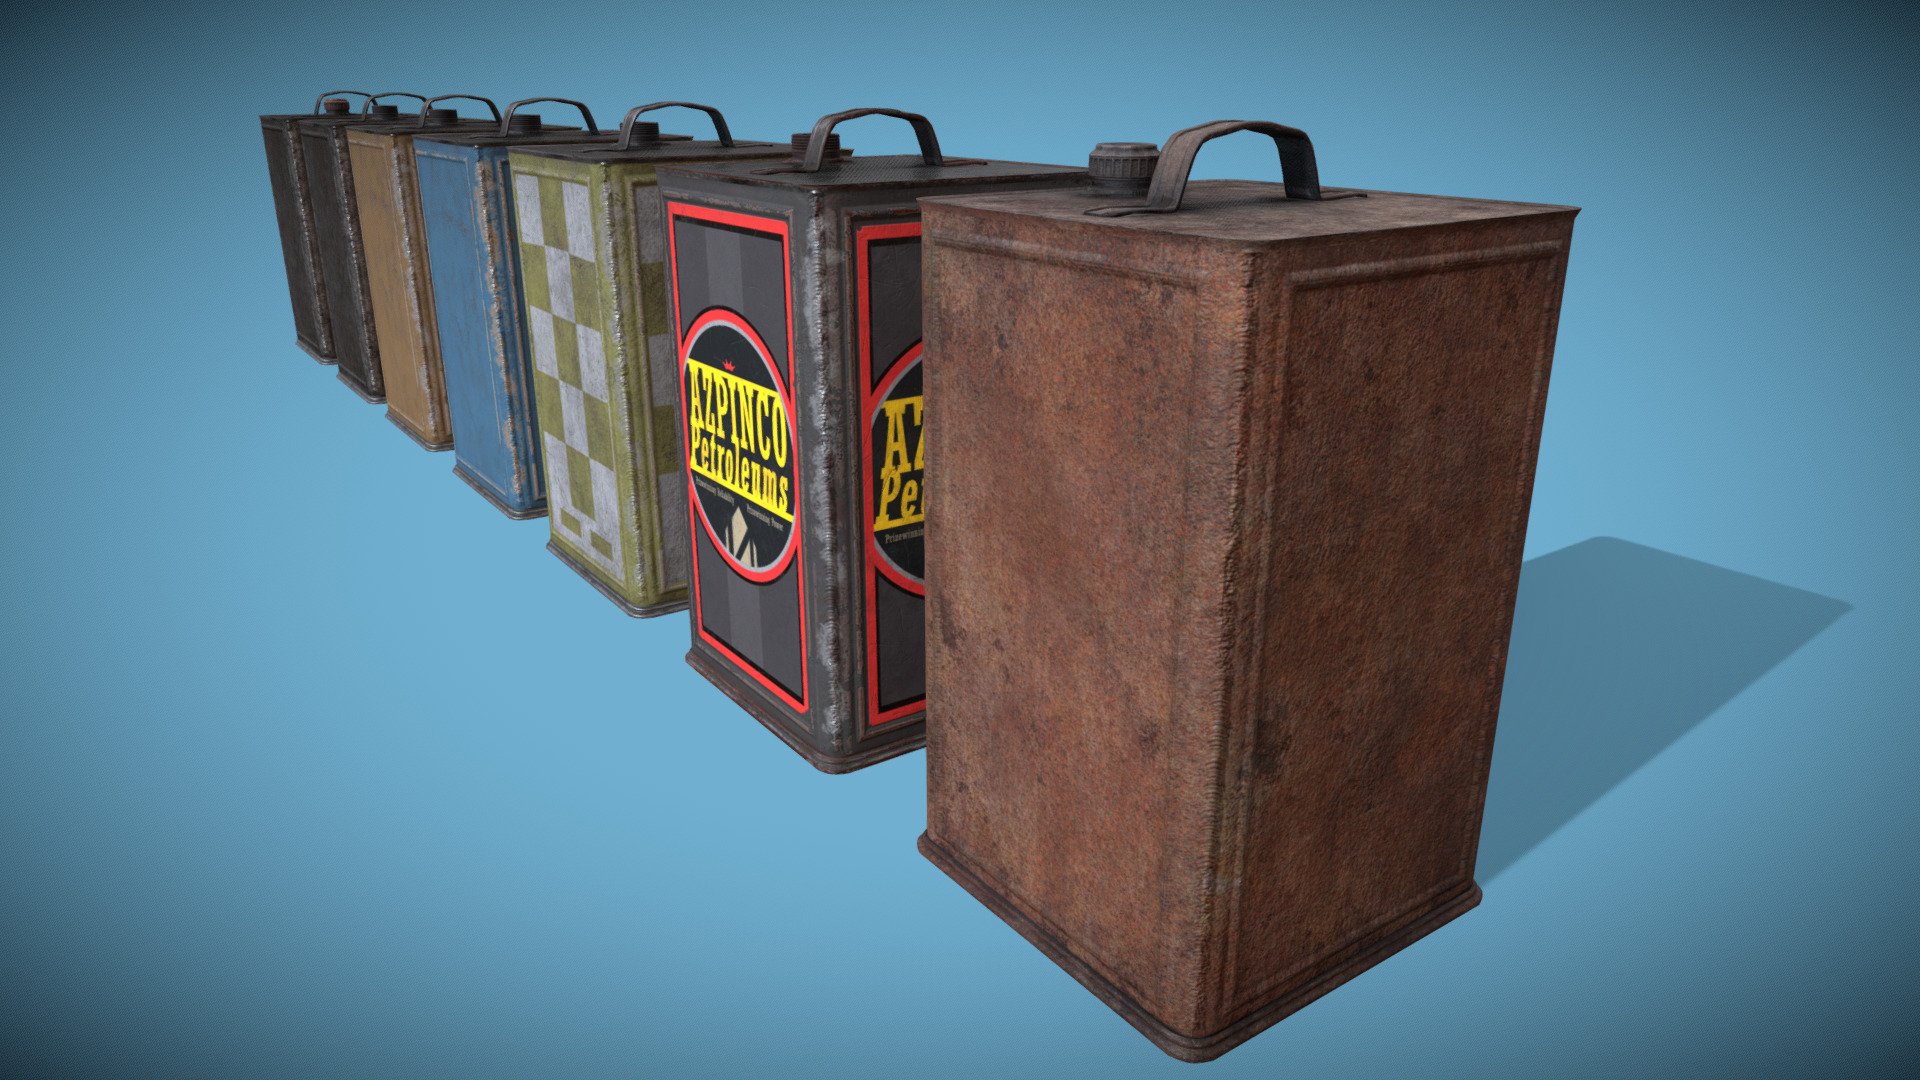 Vintage 5 Gallon Rectangular Oil Can or Motor Oil Can / Gas Can. Typical of a home-garage or old gas-station interior. Comes with several texture variations.

Additional files zip includes all uncompressed PNG files as well as a alternate version with differently weighted normals and slightly altered geometry for optimal cycles rendering 3d model